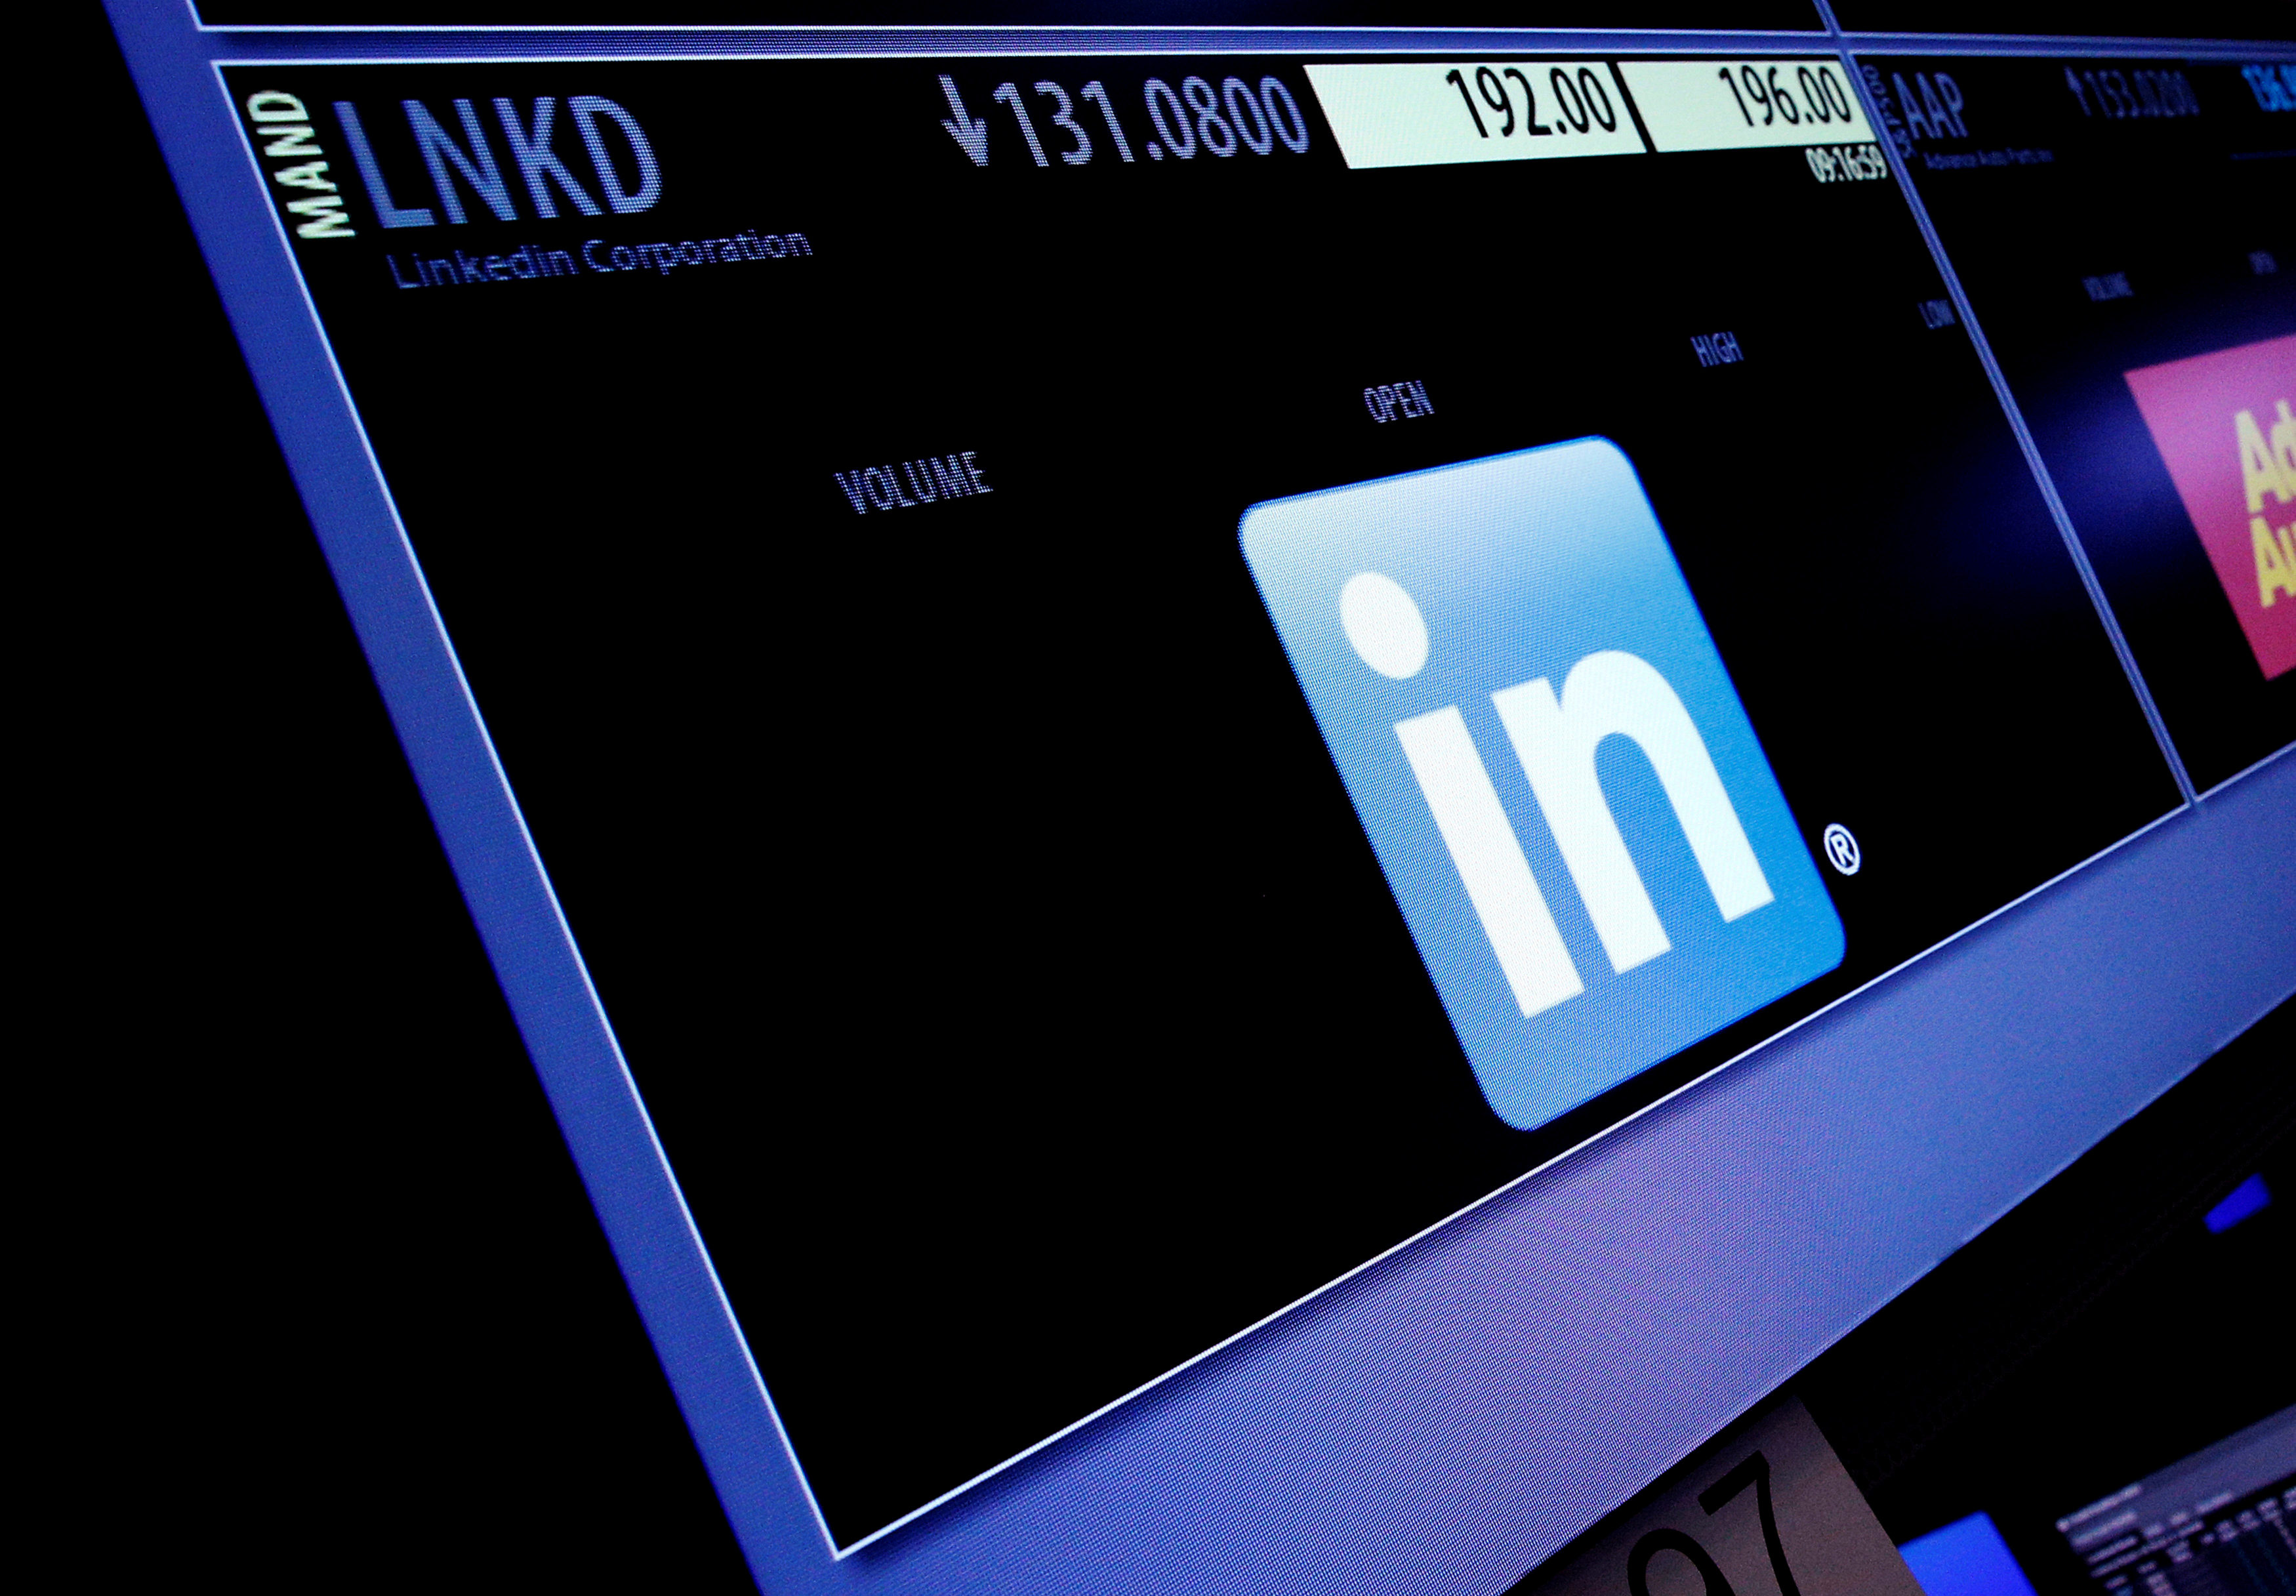 The ticker symbol and trading information for LinkedIn Corp. is displayed on a screen on the floor of the NYSE